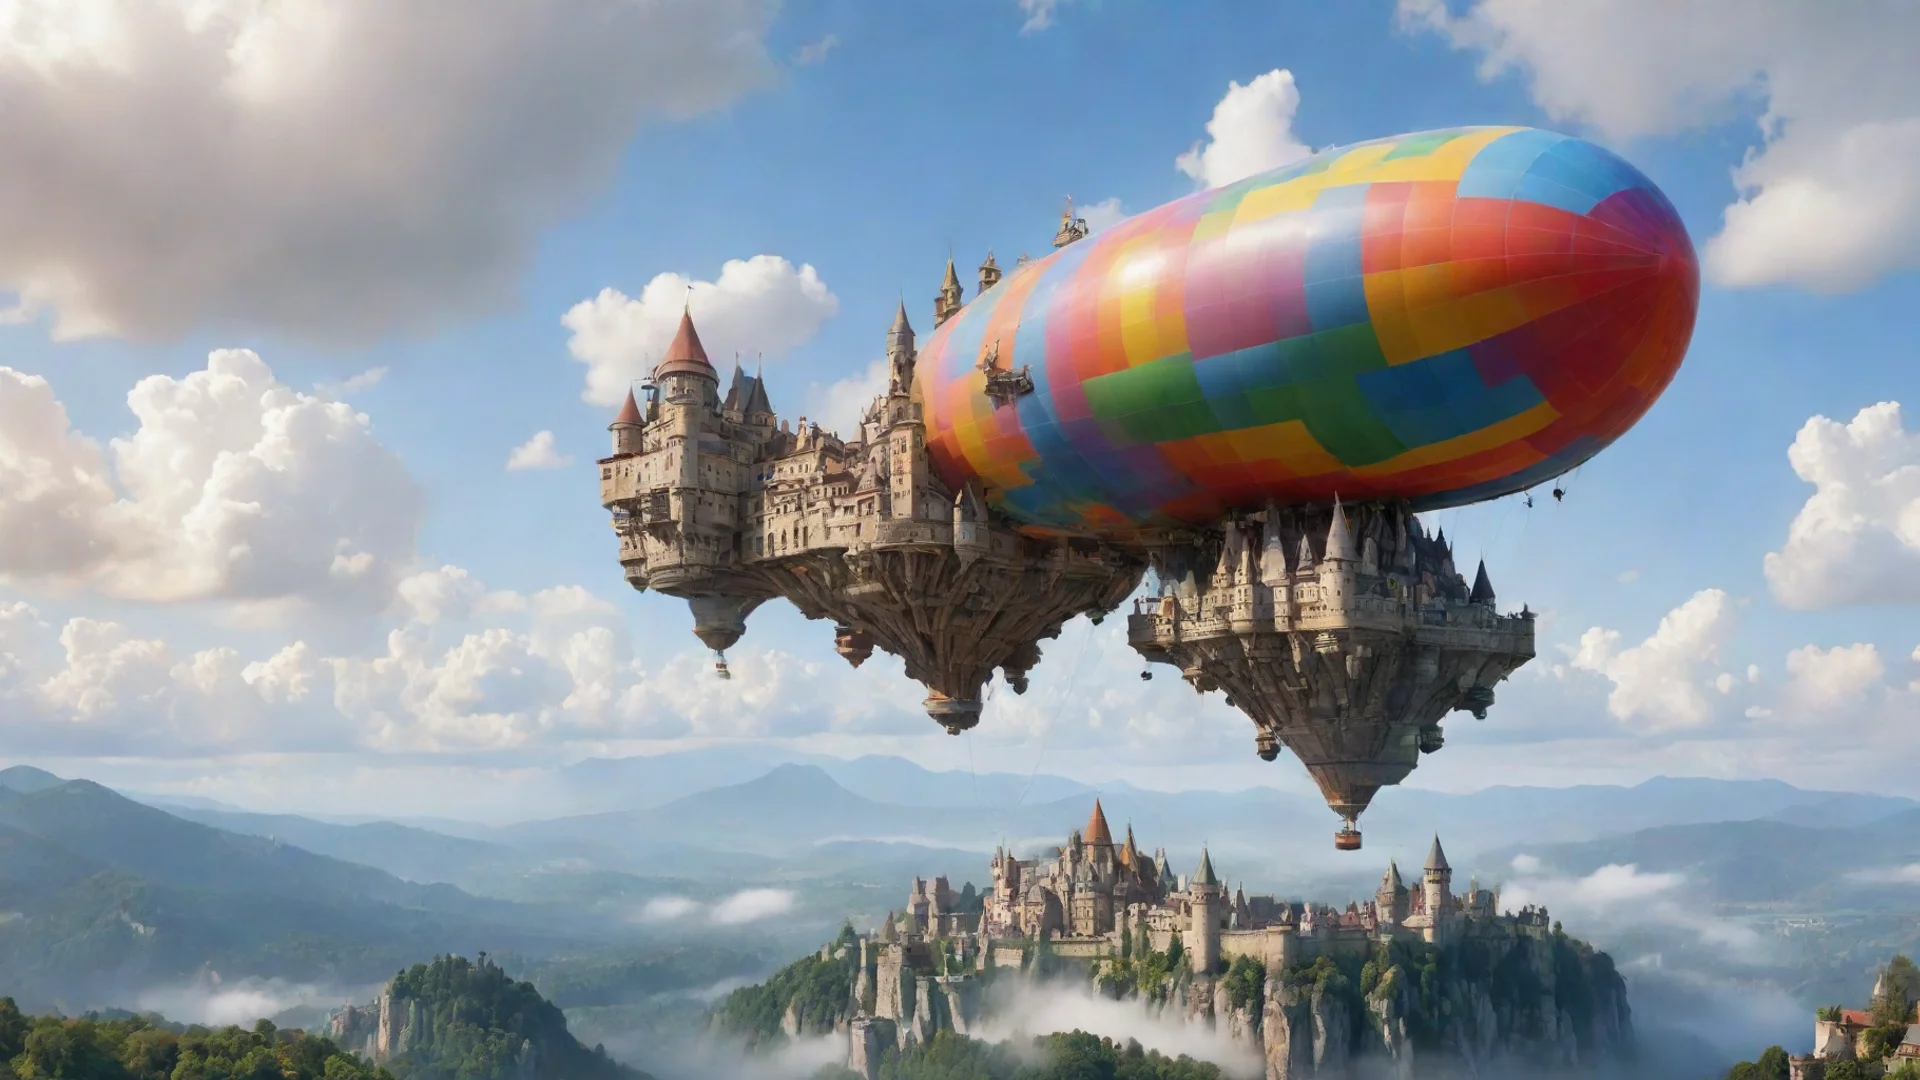 aiartstation art castle in sky amazing awesome architectural masterpiece wow hd colorful world floating blimp confident engaging wow 3 wide